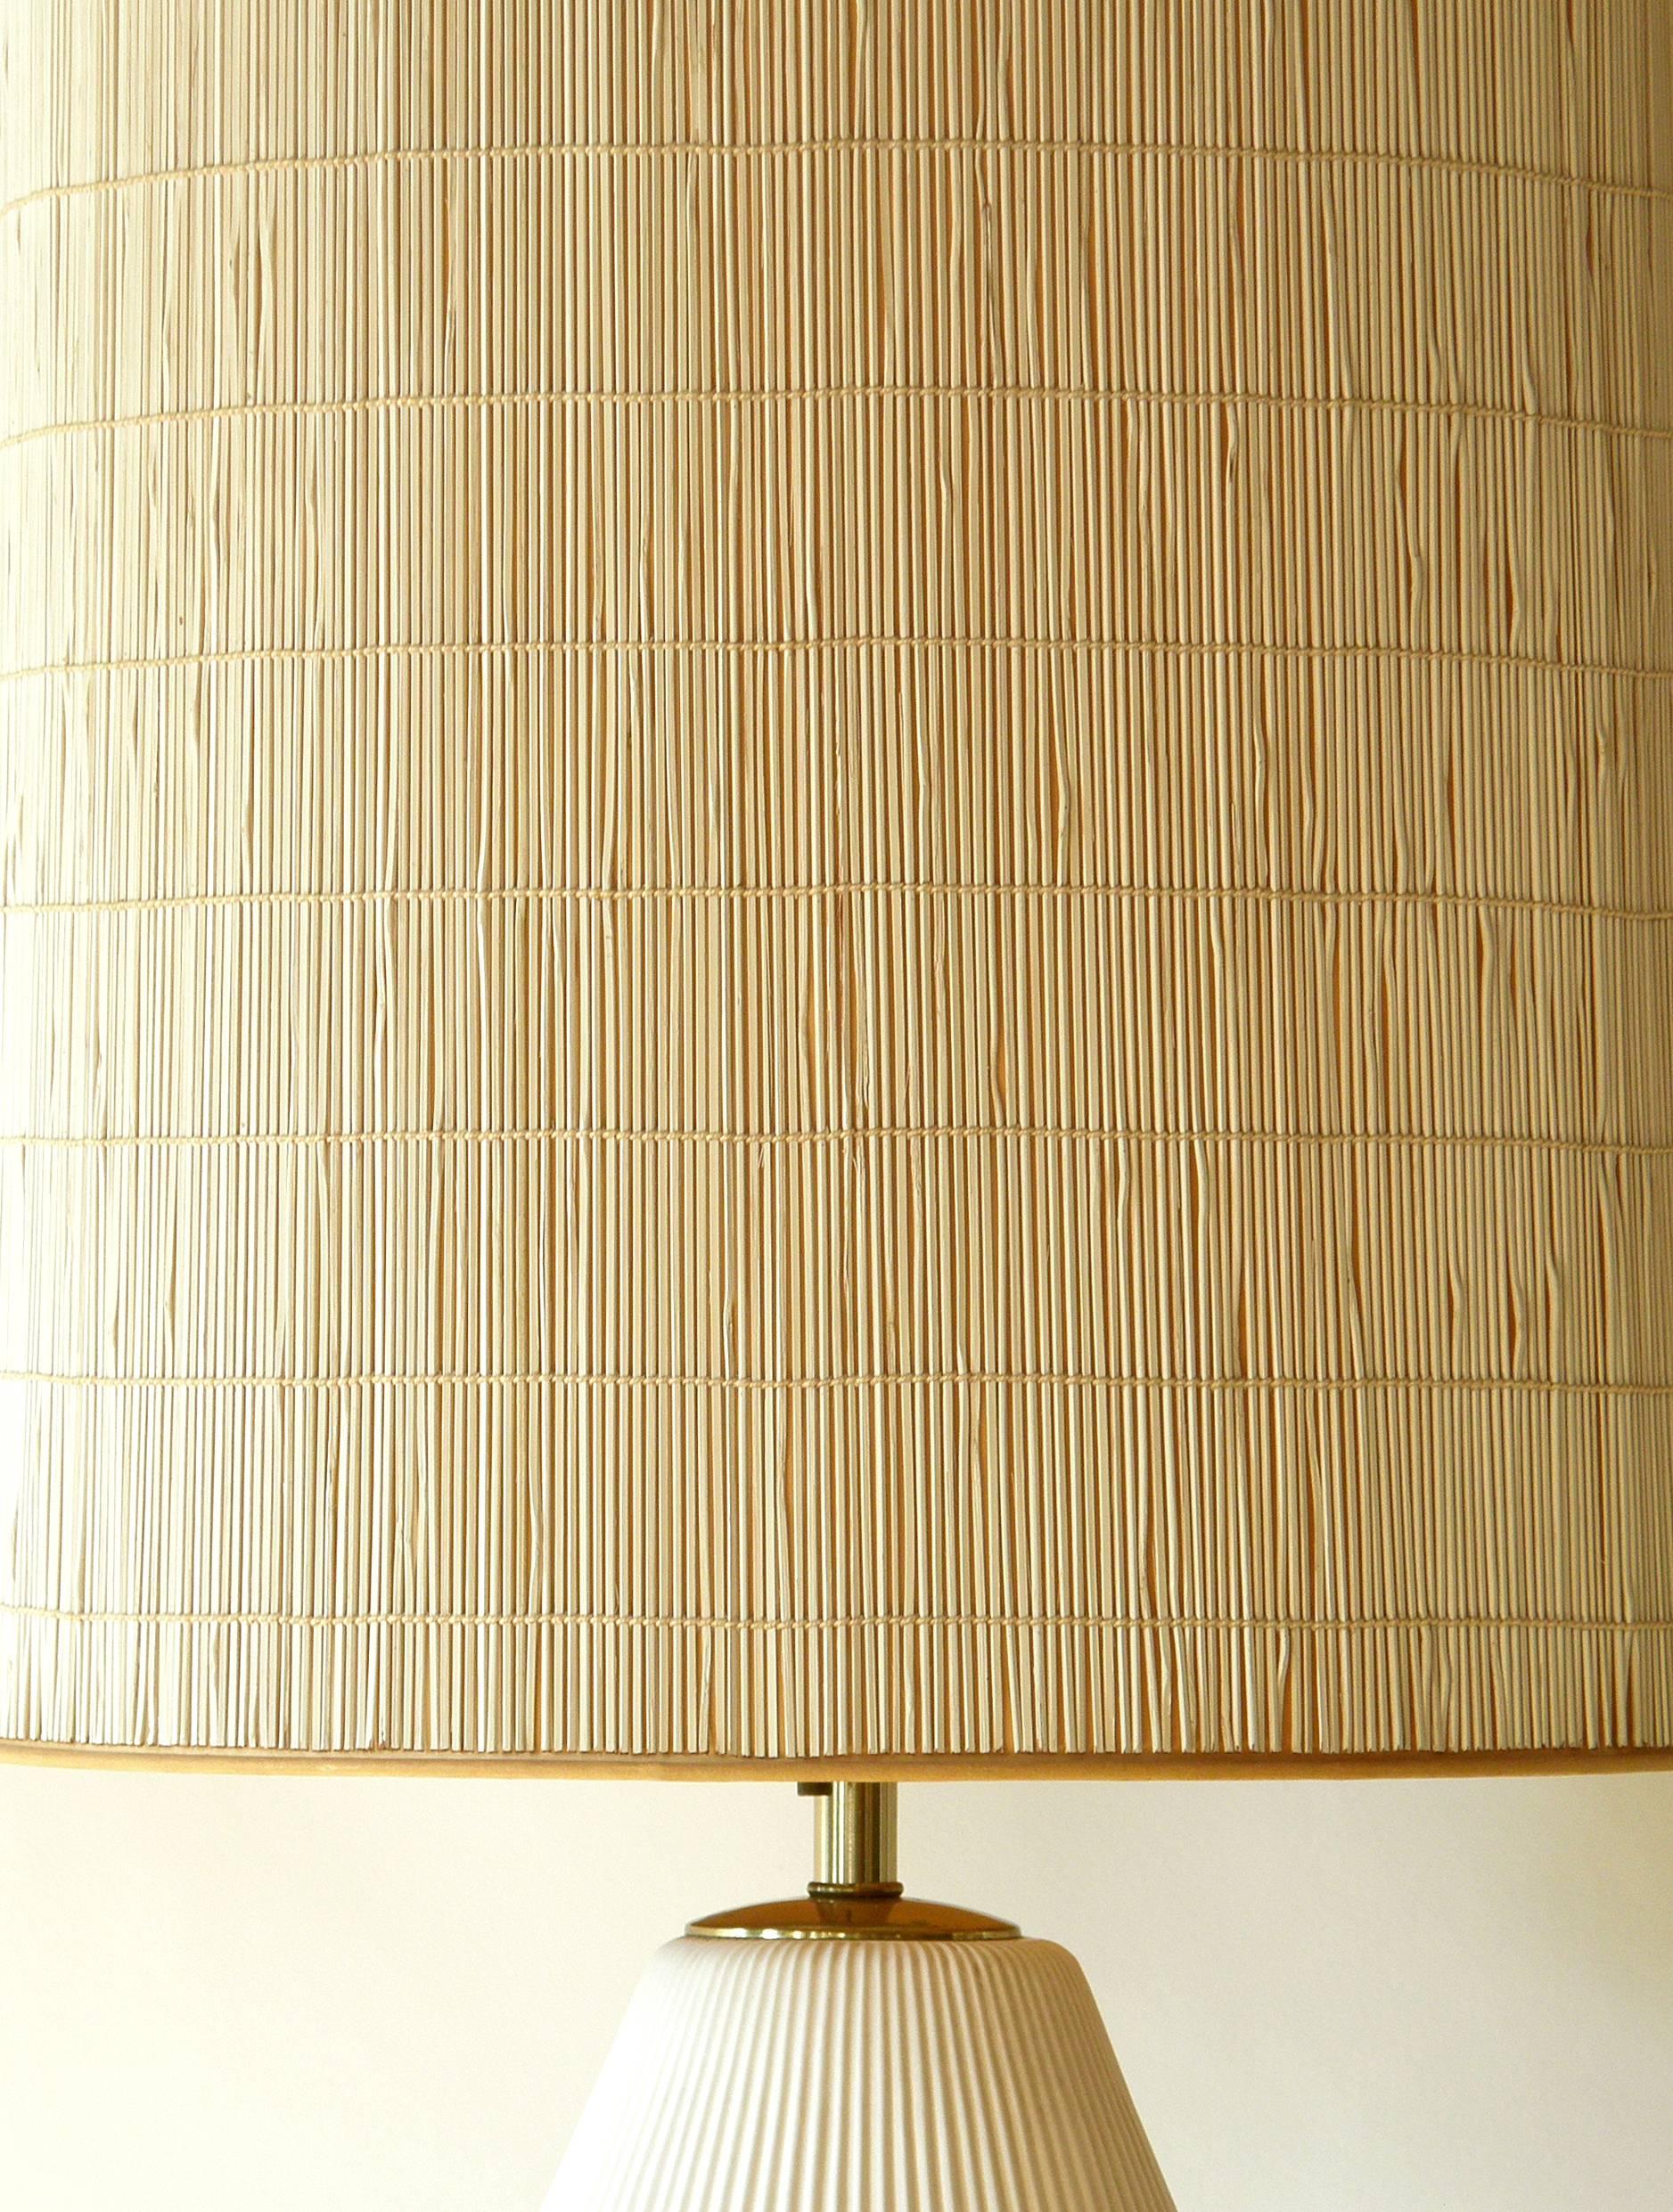 Gerald Thurston table lamp for Lightolier. The ceramic base has a 